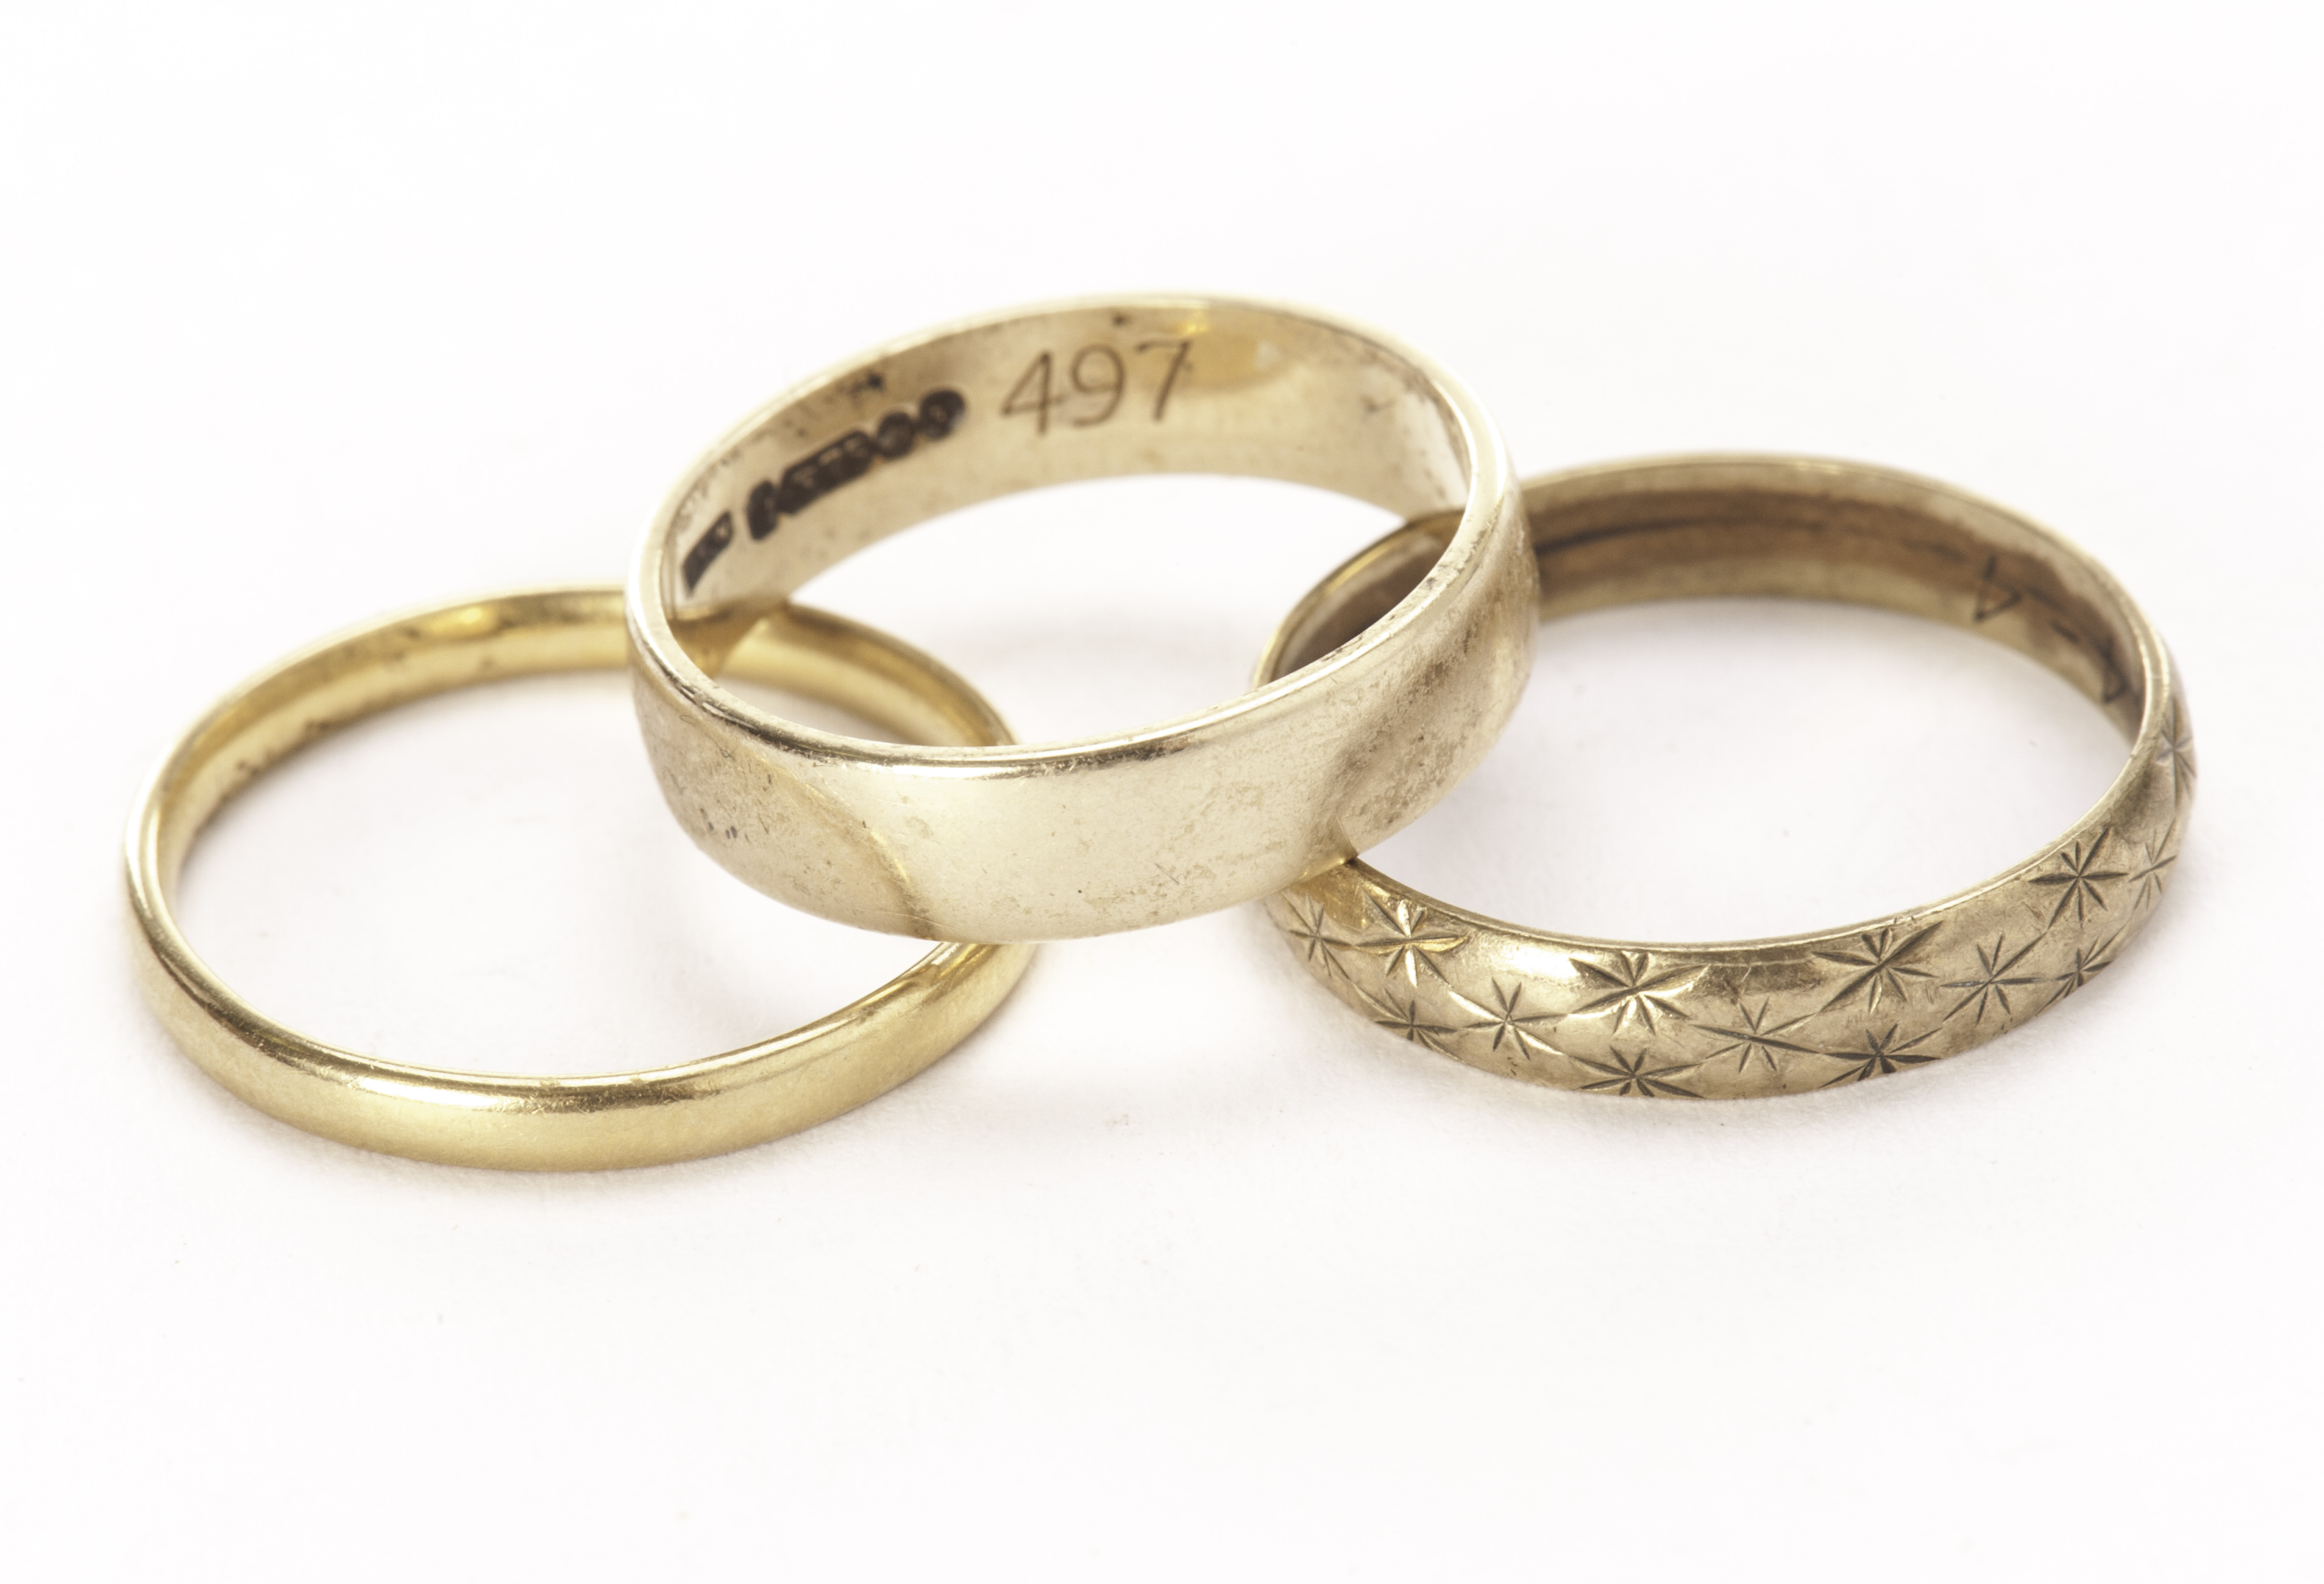 Three gold wedding bands, including a plain 22ct gold ring, a plain 9ct gold example and an